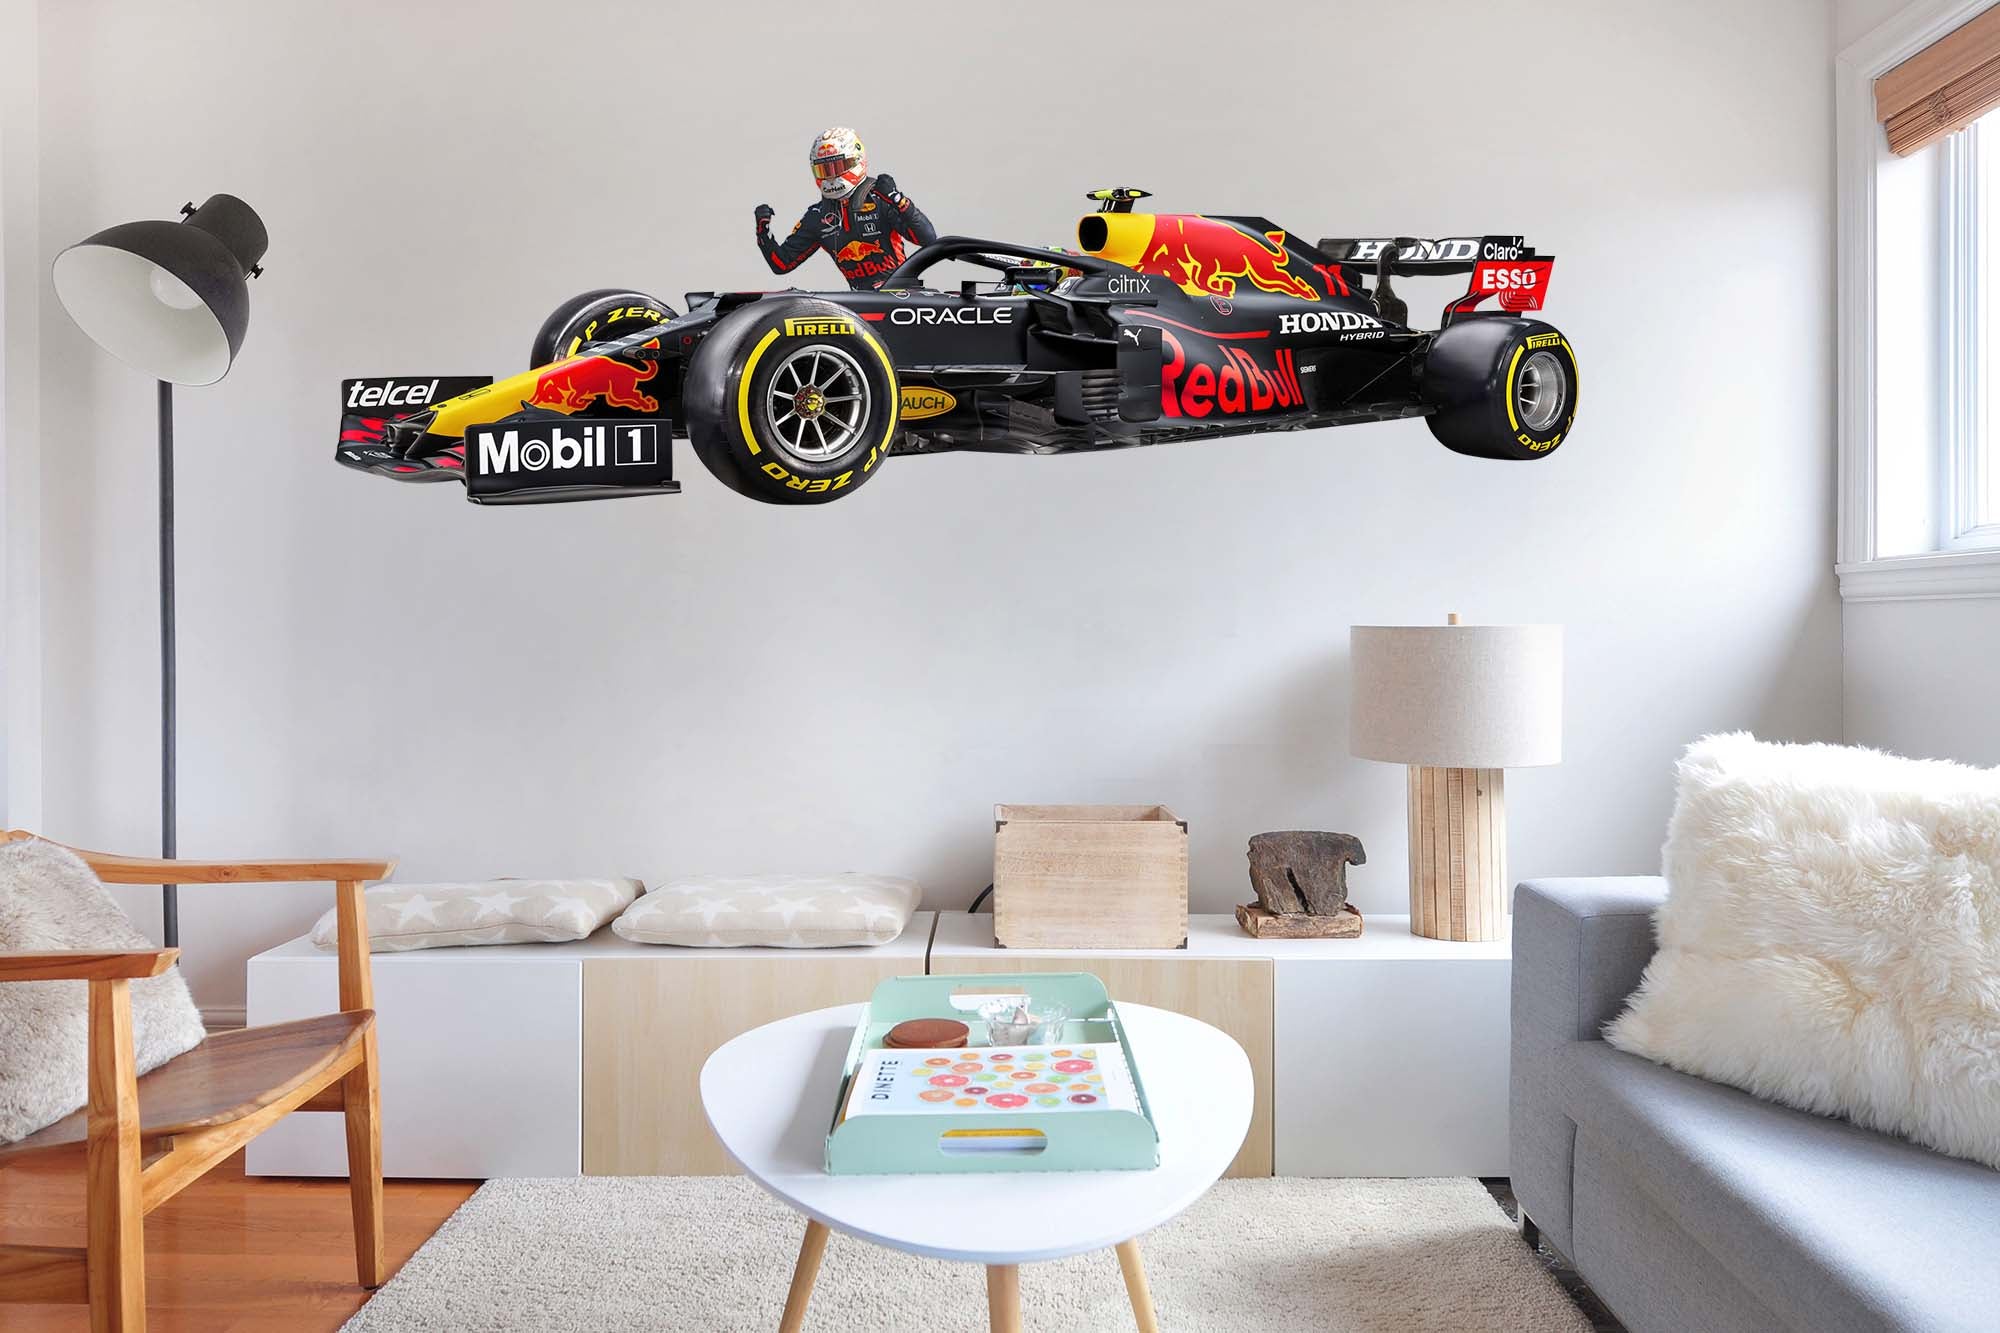 2021 Red Bulls Wall Decal Sticker with Max Verstappen Cherring, Removable Peel-N-Stick 002